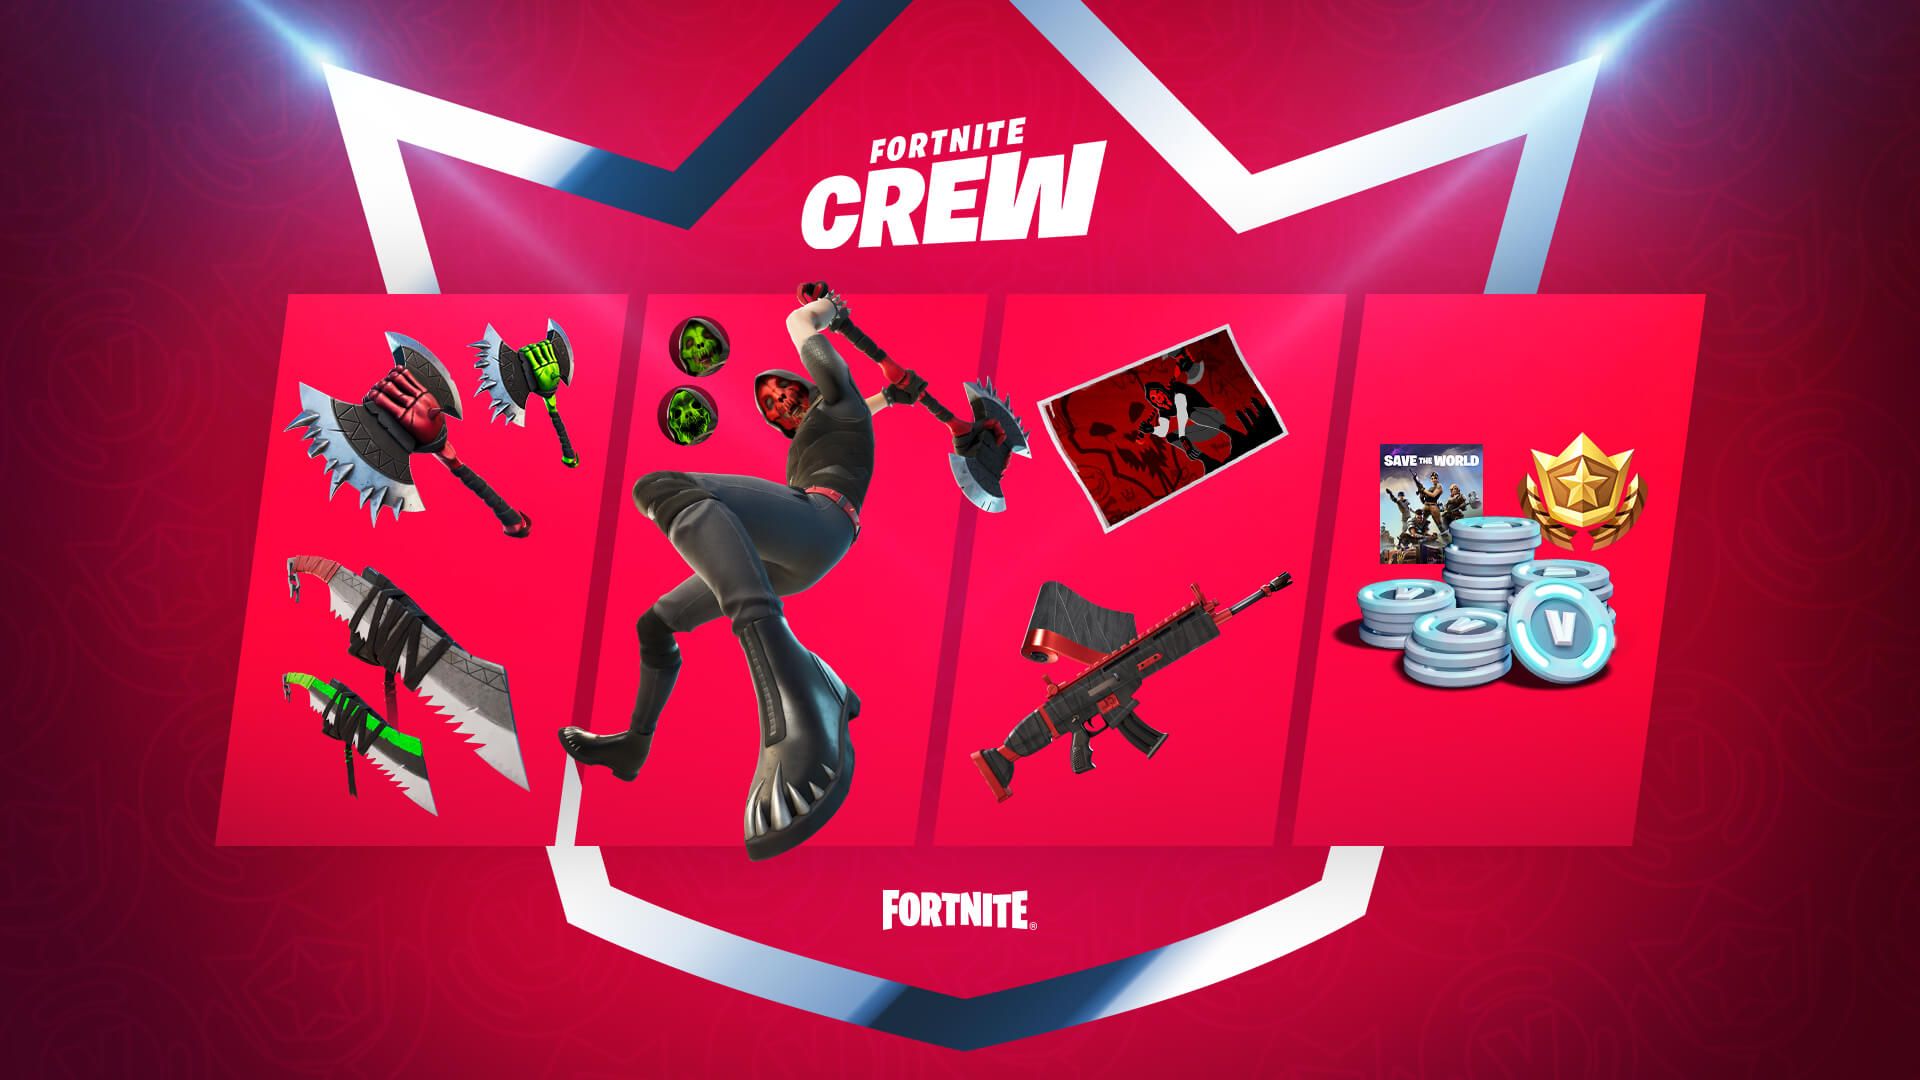 Deimos Rises to the Occasion in Fortnite Crew